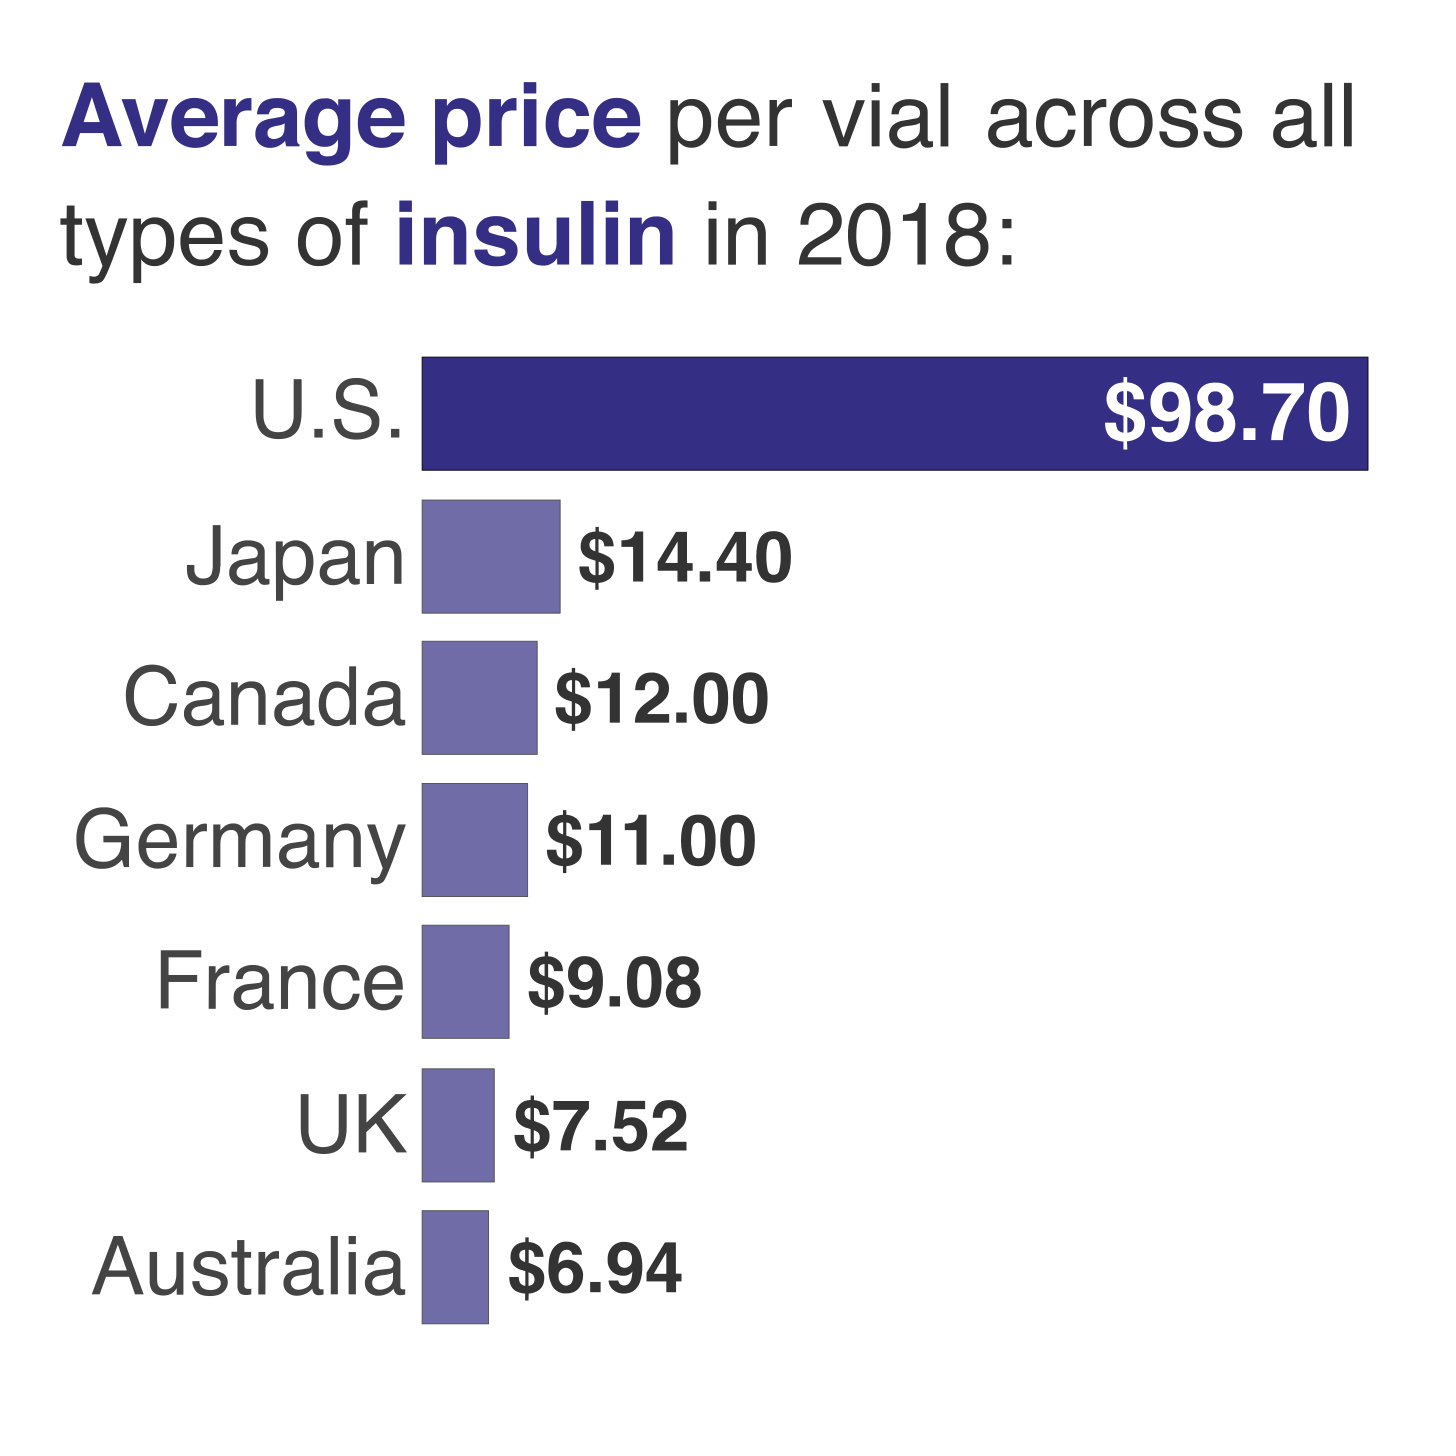 Average price per vial across all types of insulin in 2018 in seven countries, image by Chrissy Sovak/RAND Corporation